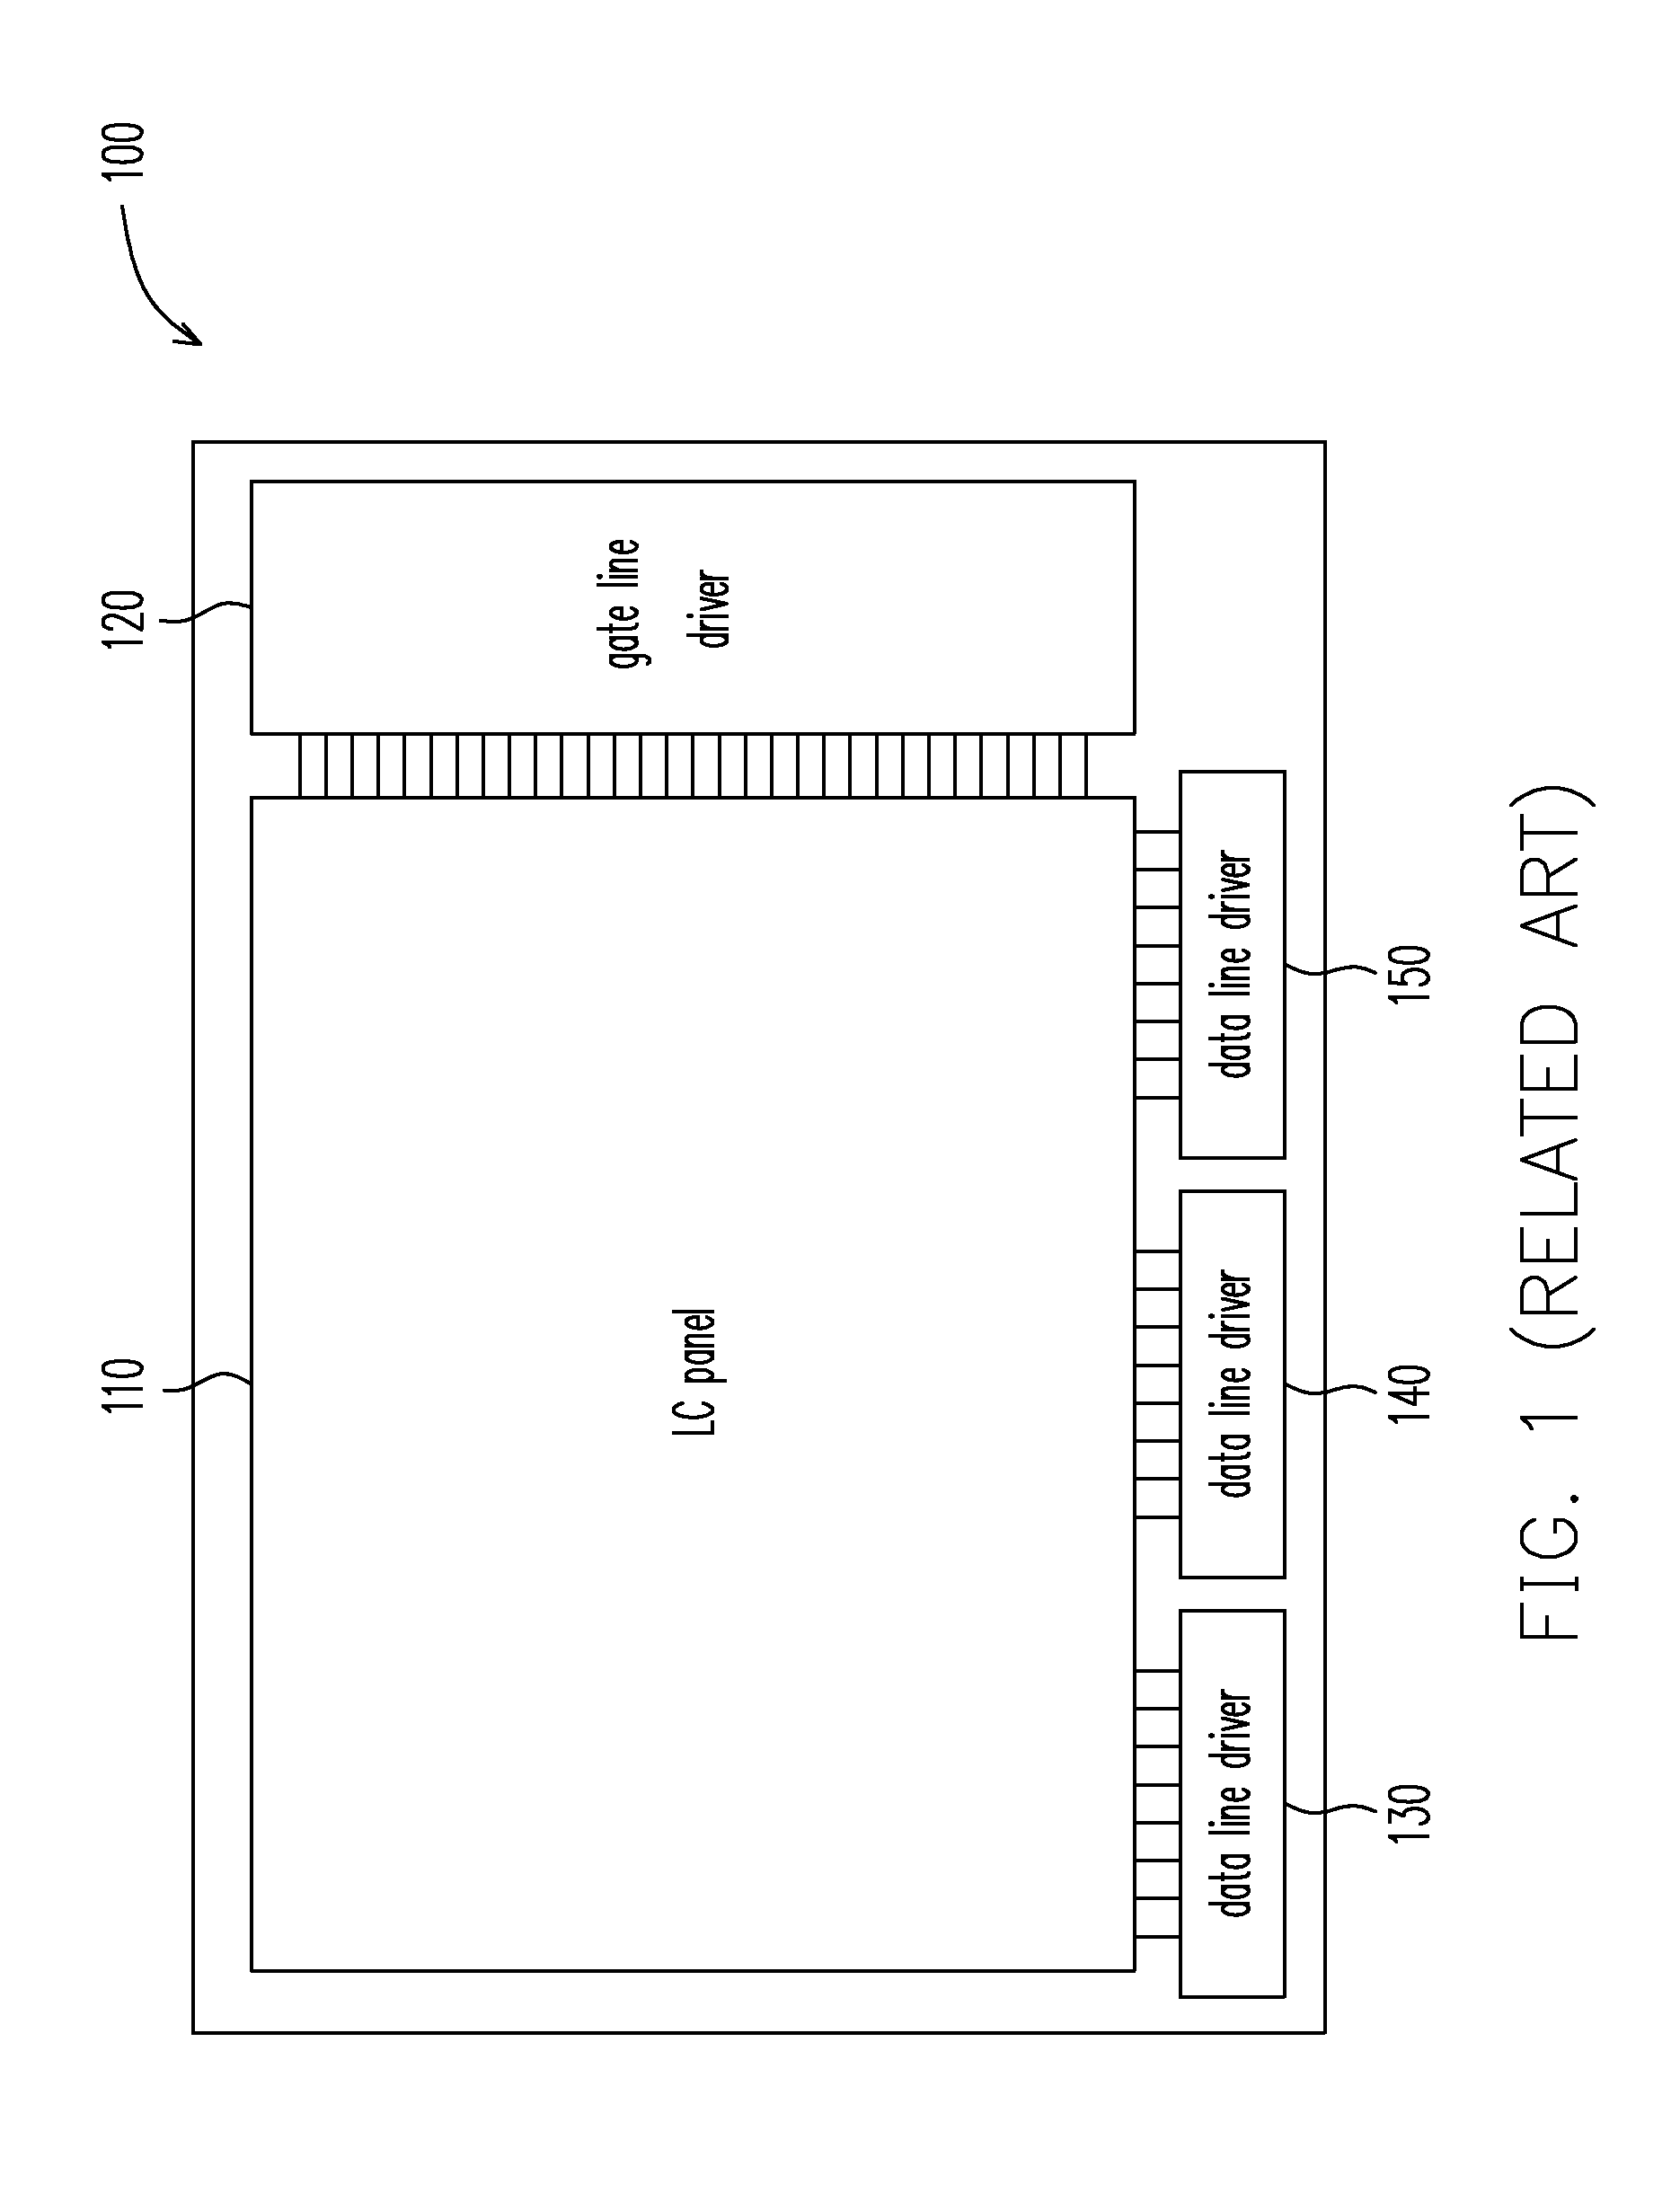 Gate line driving module for liquid crystal display and liquid crystal display using the same